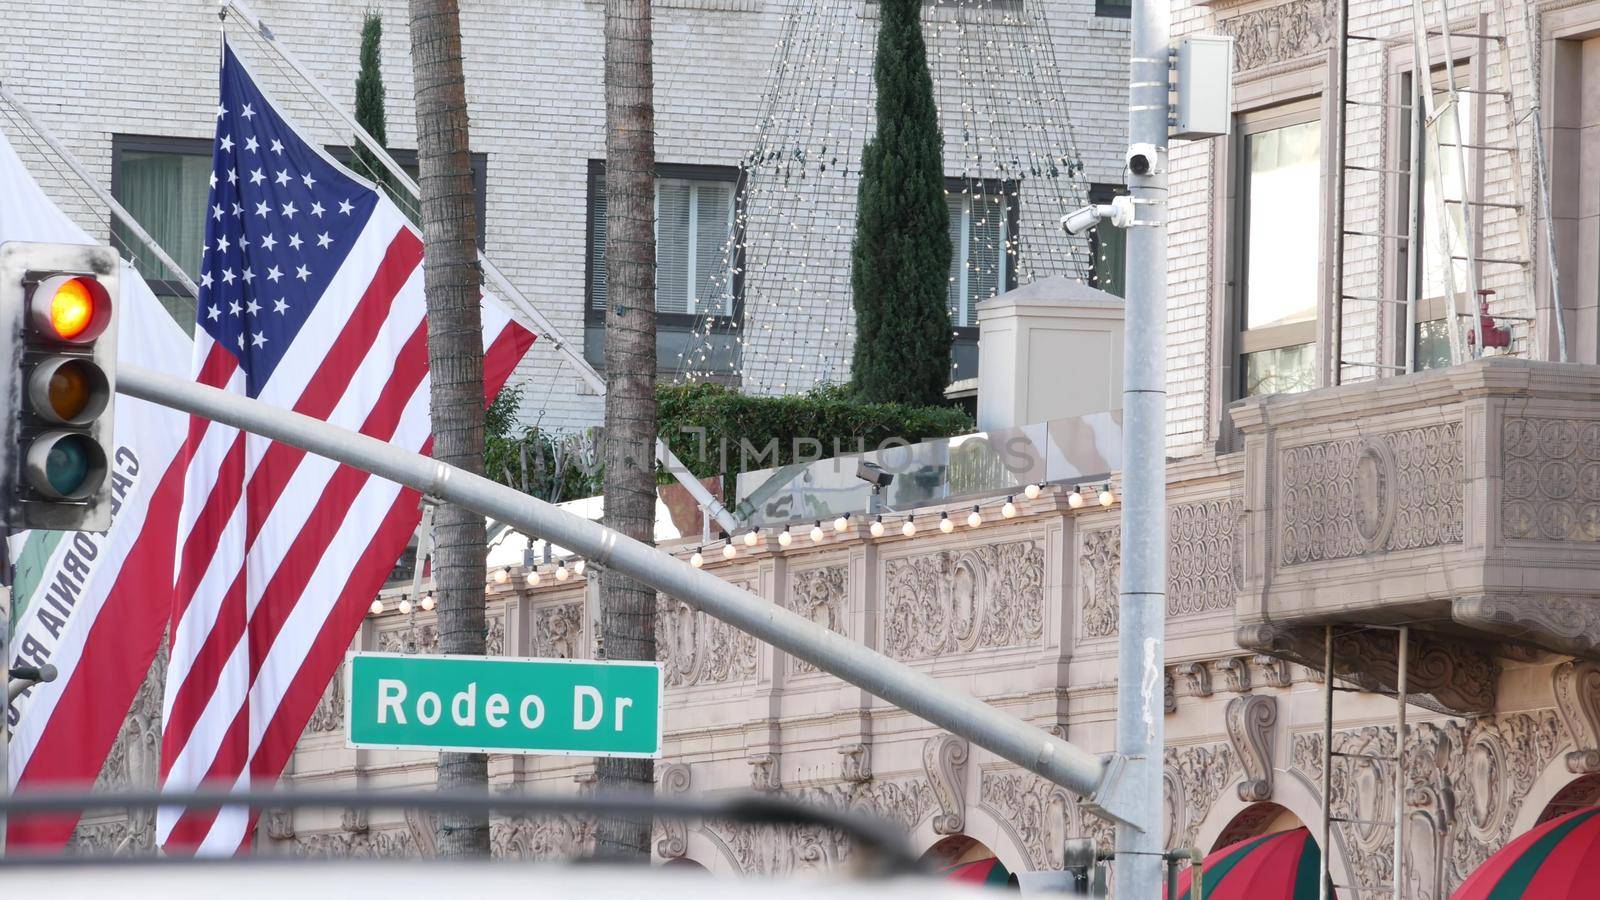 World famous Rodeo Drive Street Road Sign in Beverly Hills against American Unated States flag. Los Angeles, California, USA. Rich wealthy life consumerism, Luxury brands, high-class stores concept. by DogoraSun